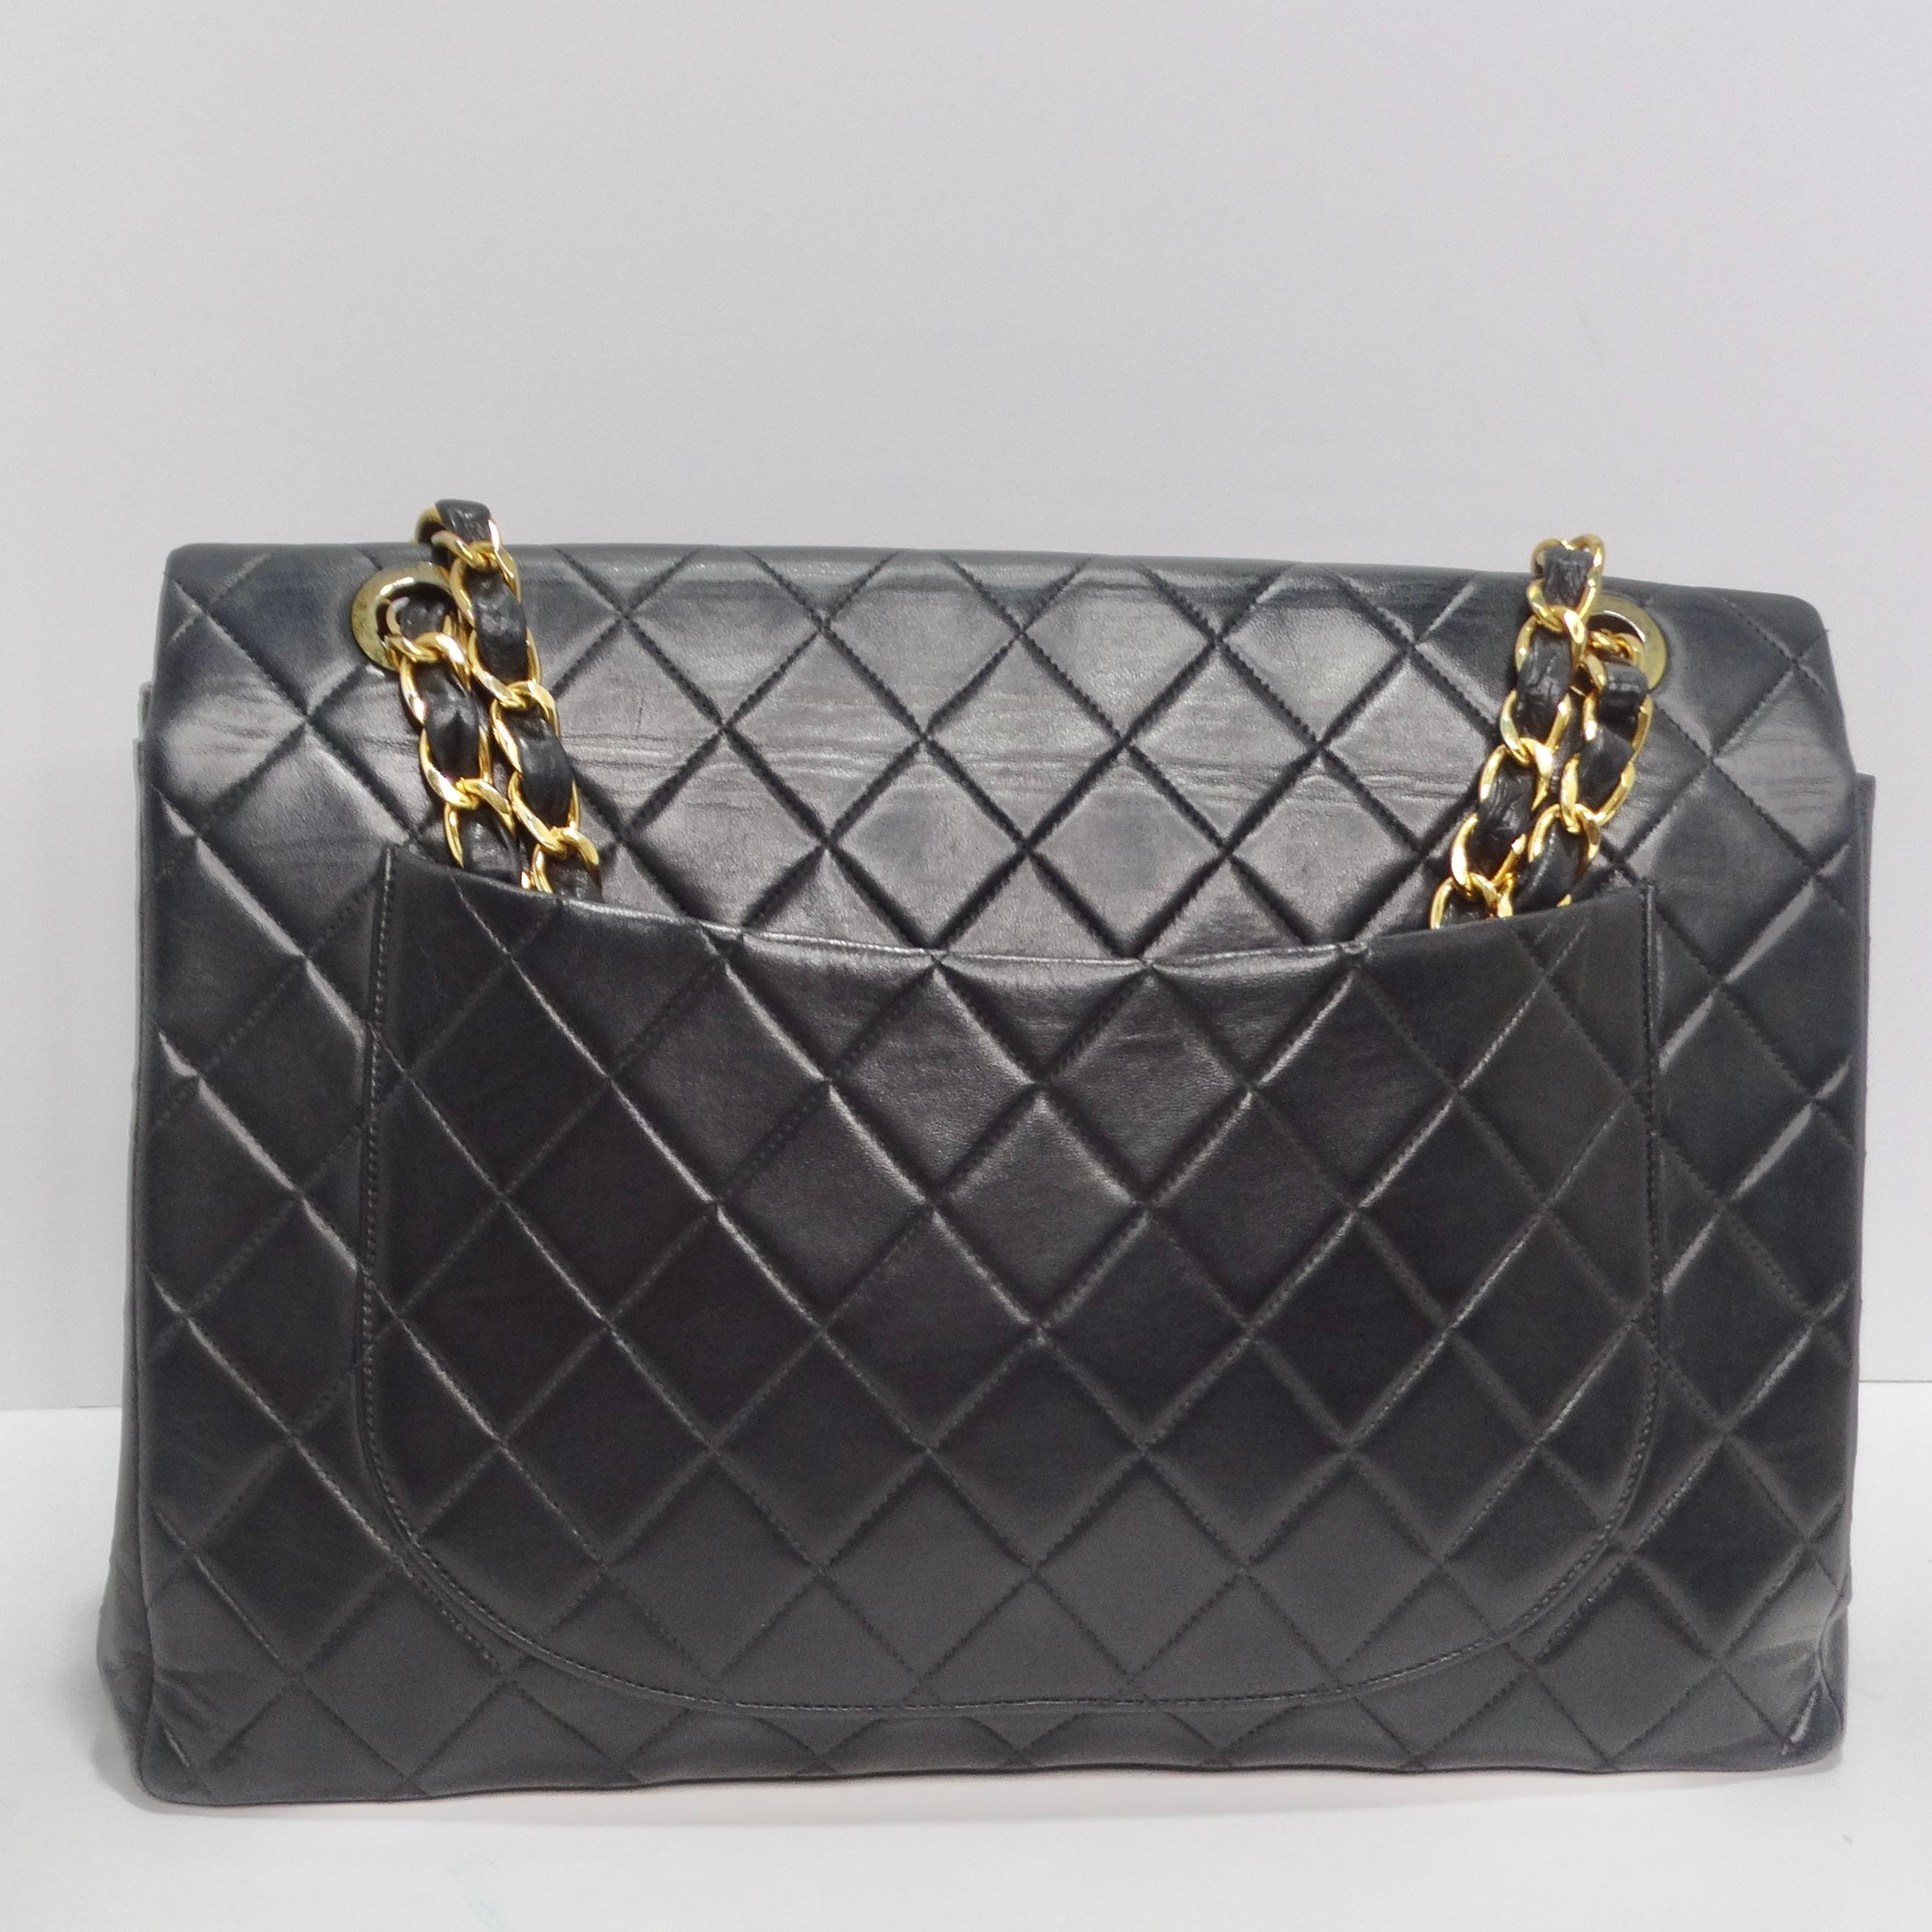 Chanel 1980s Classic Black Leather Maxi Single Flap Handtasche im Angebot 1